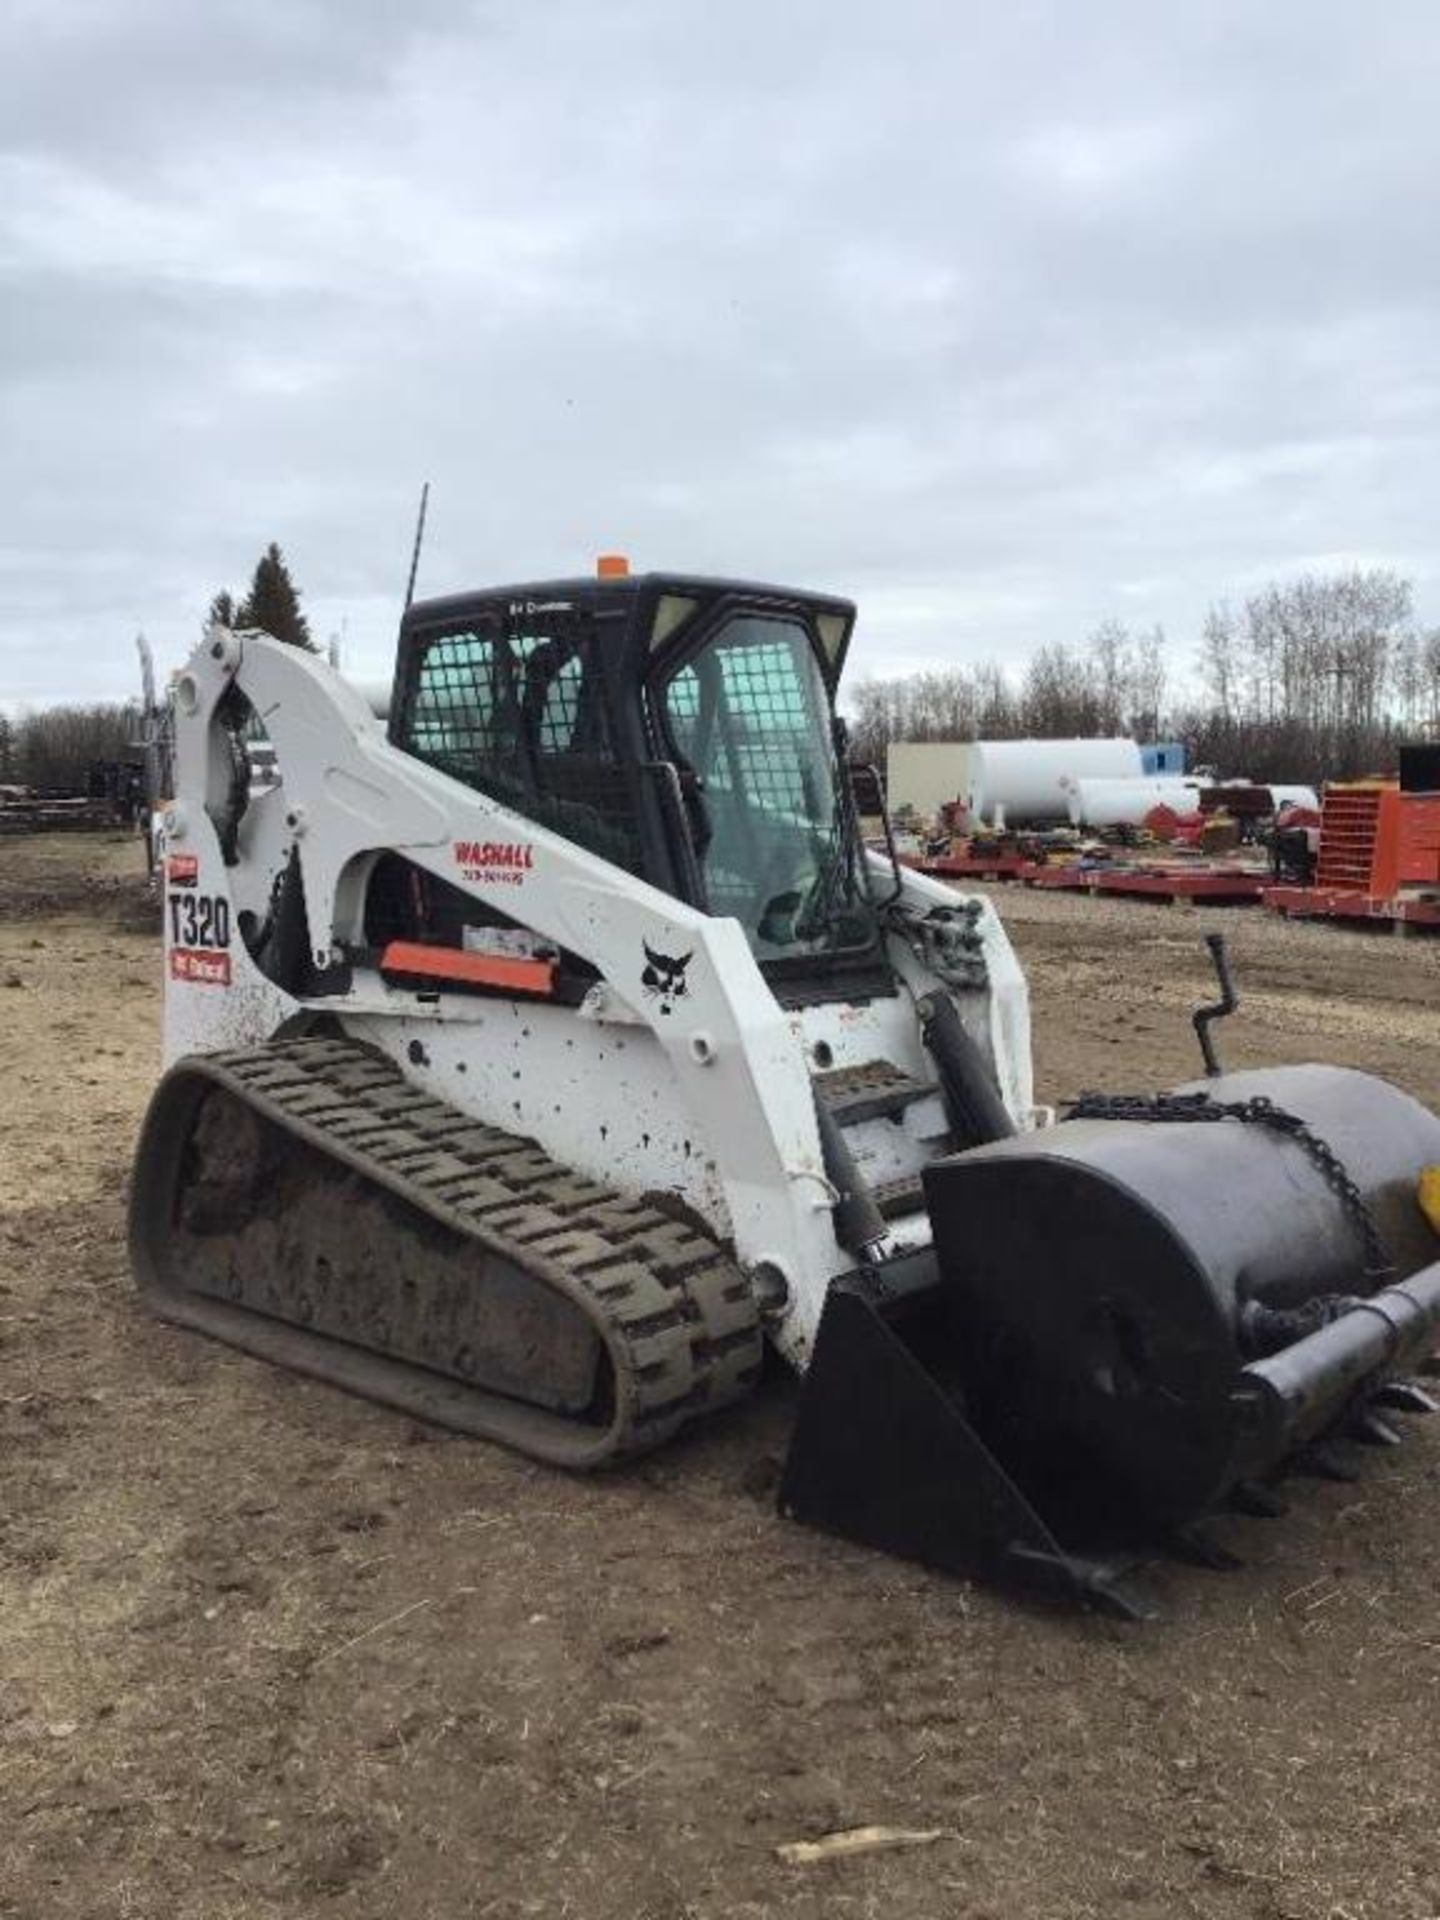 2008 Bobcat T320 Skidsteer +/-3000hrs s/n A7MP60323 +/-3000hrs s/n A7MP60323 - Image 2 of 13